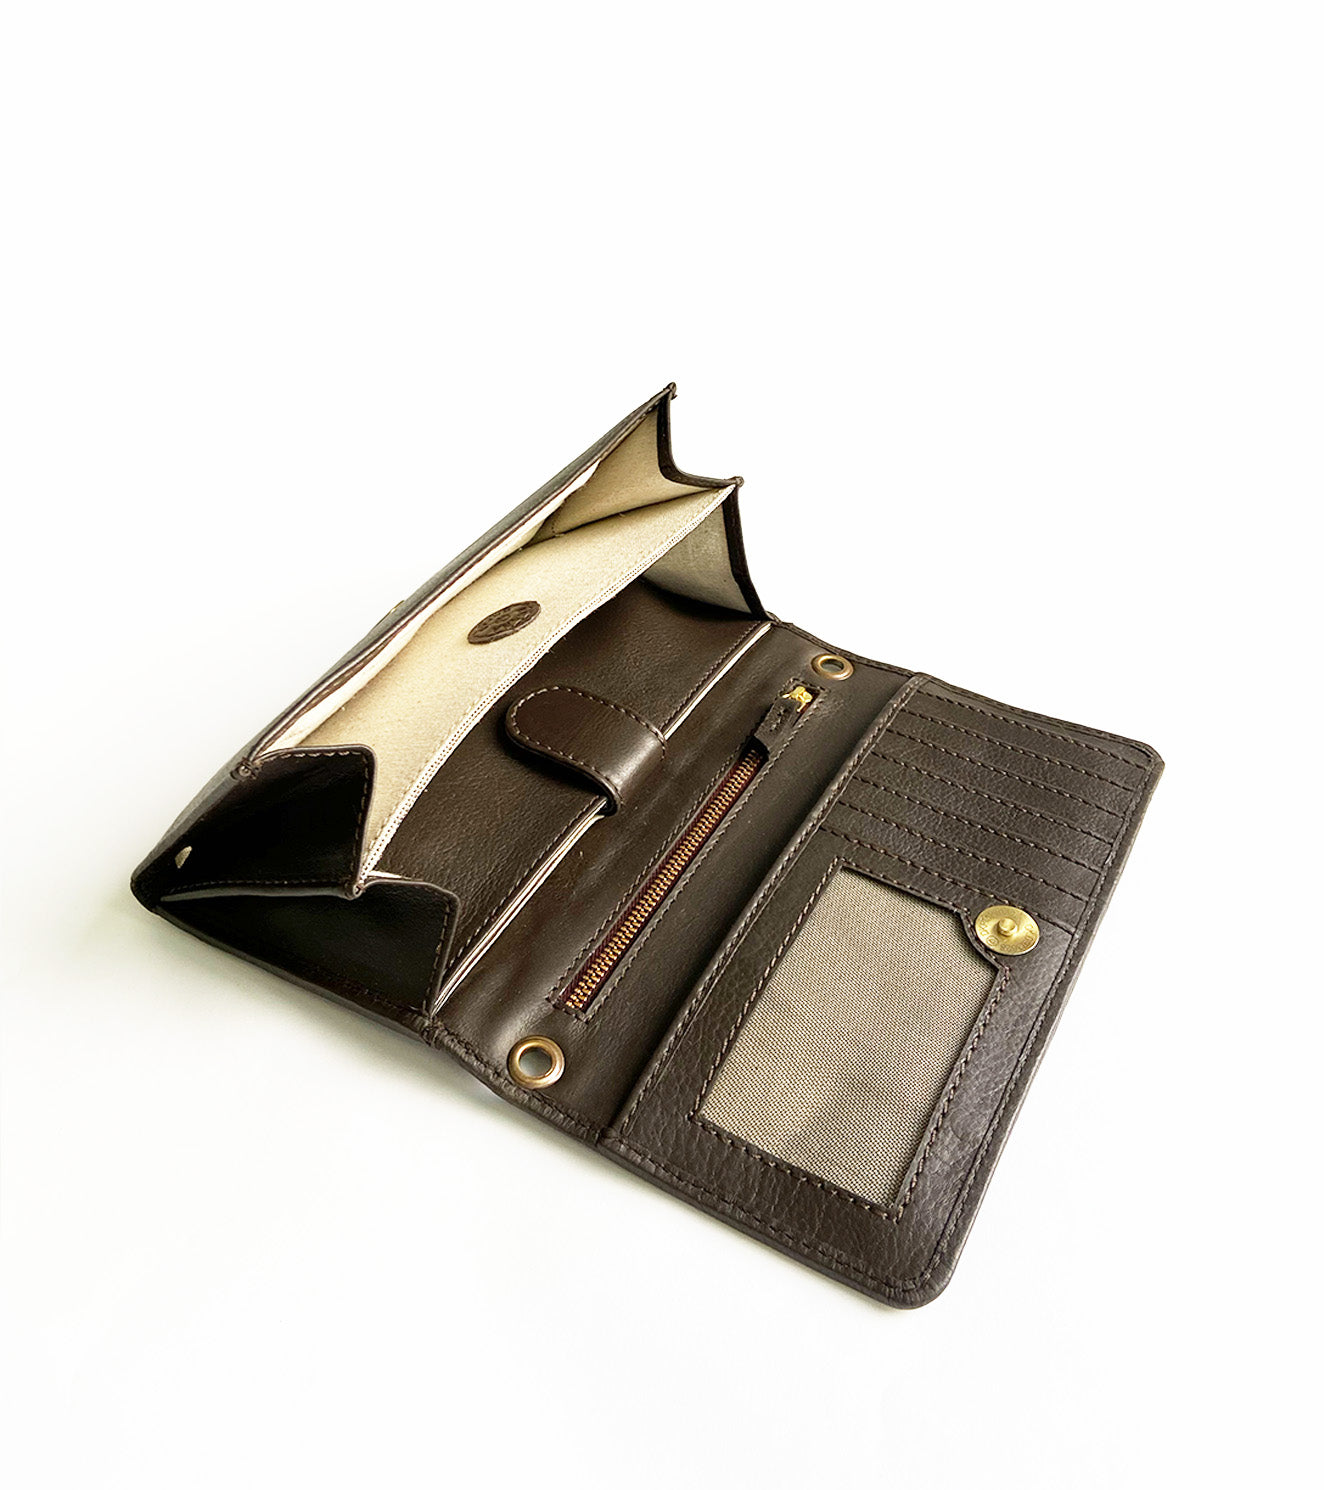 Coco sling wallet